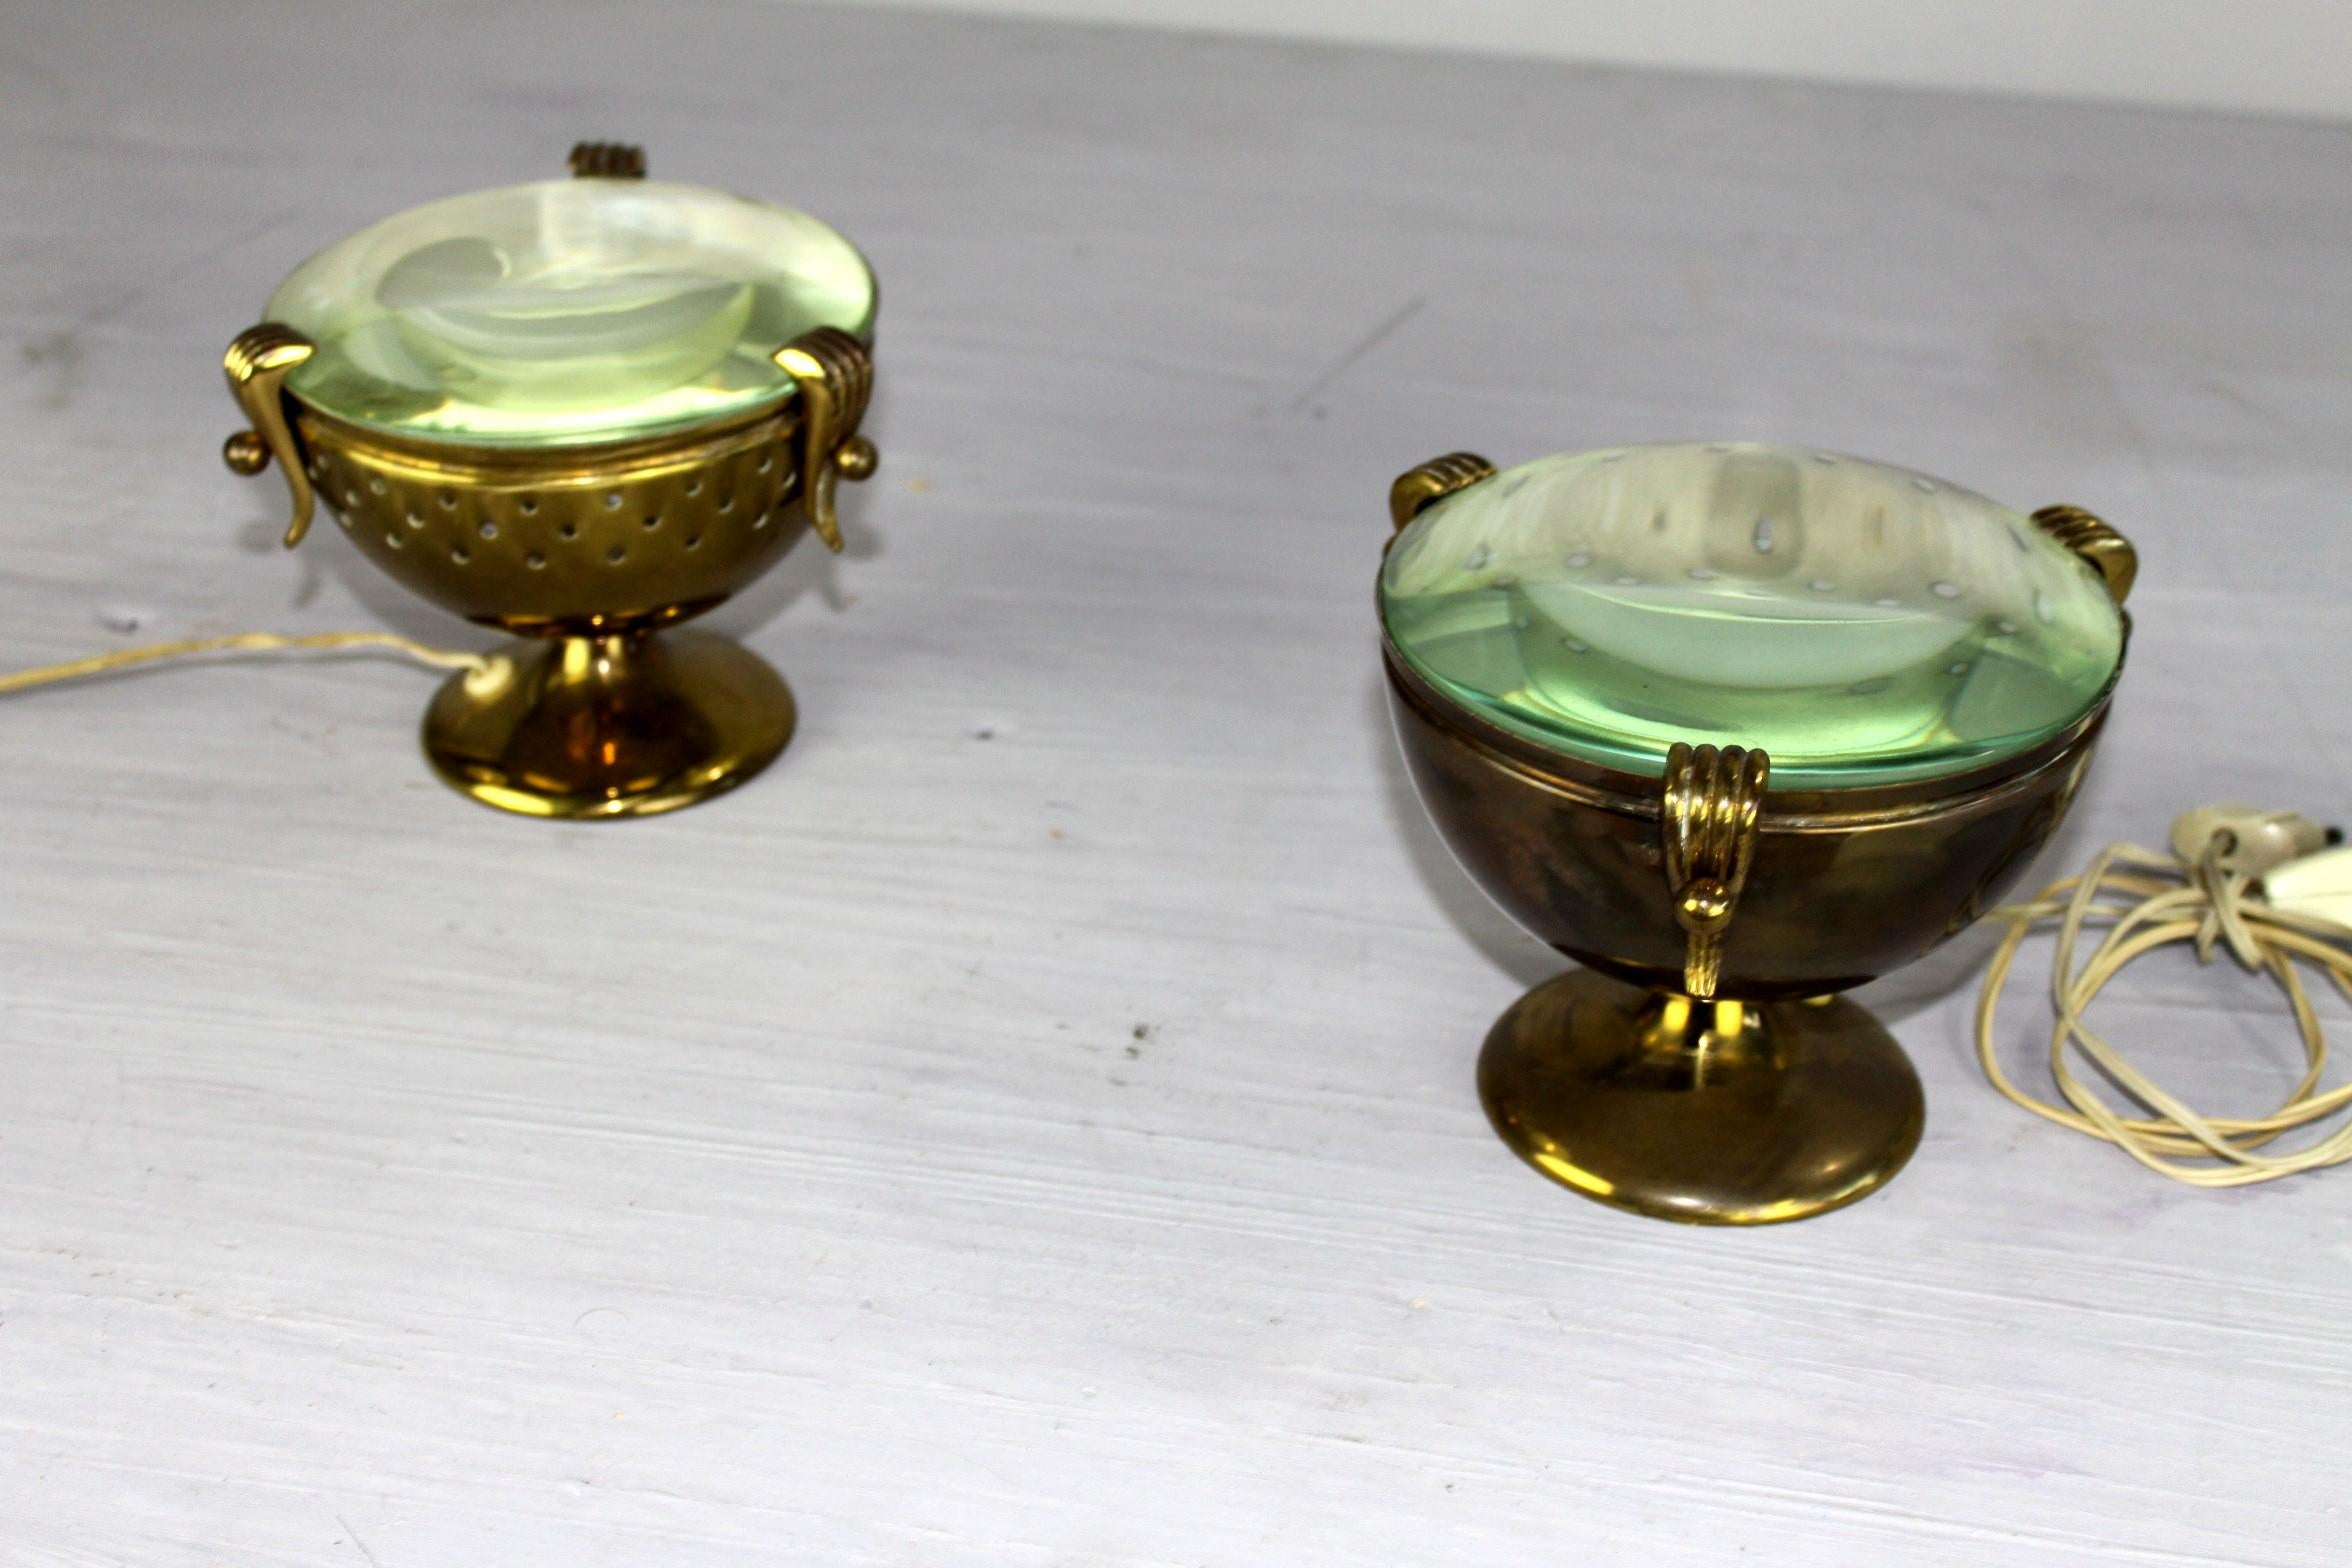 with original thick glass of saint gobain, perfect condition in patina,he and she lamps
